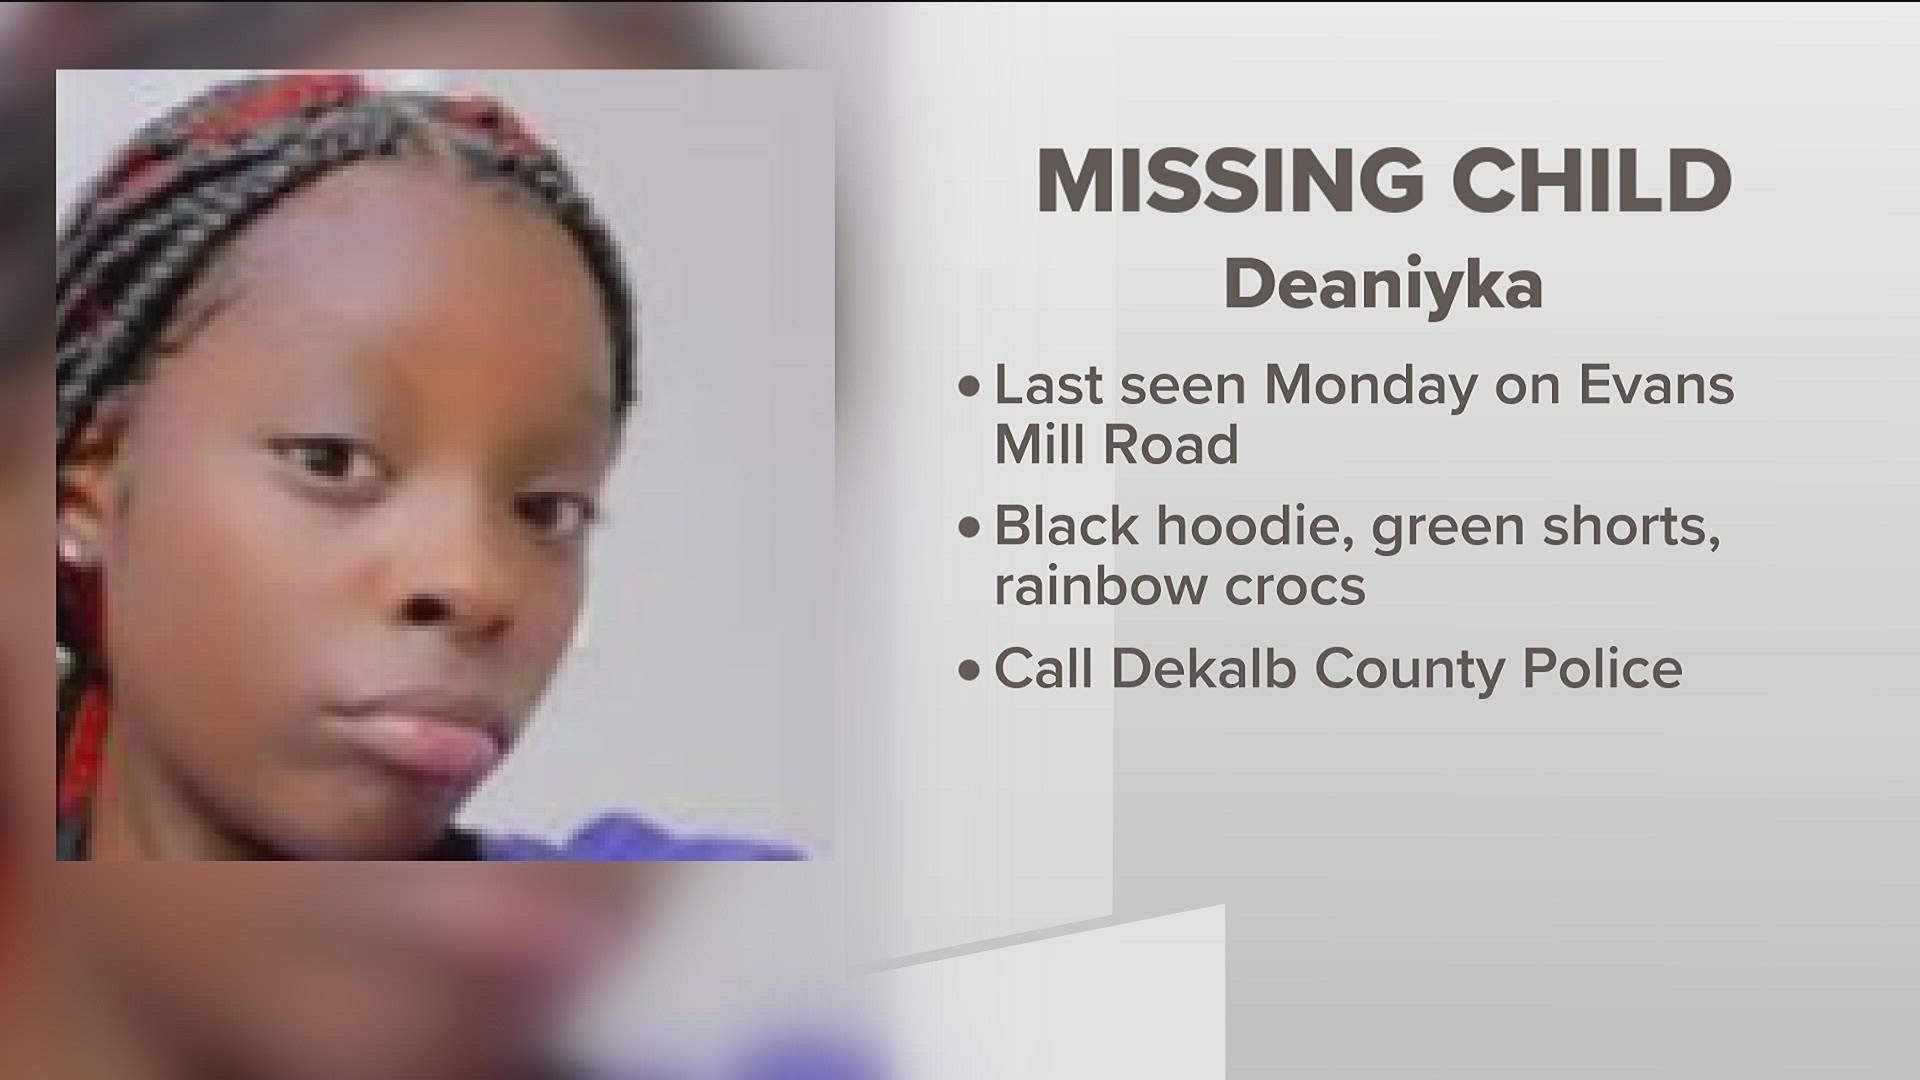 The department said Deaniyka, 13, was last seen leaving her home on Evans Mill Road.